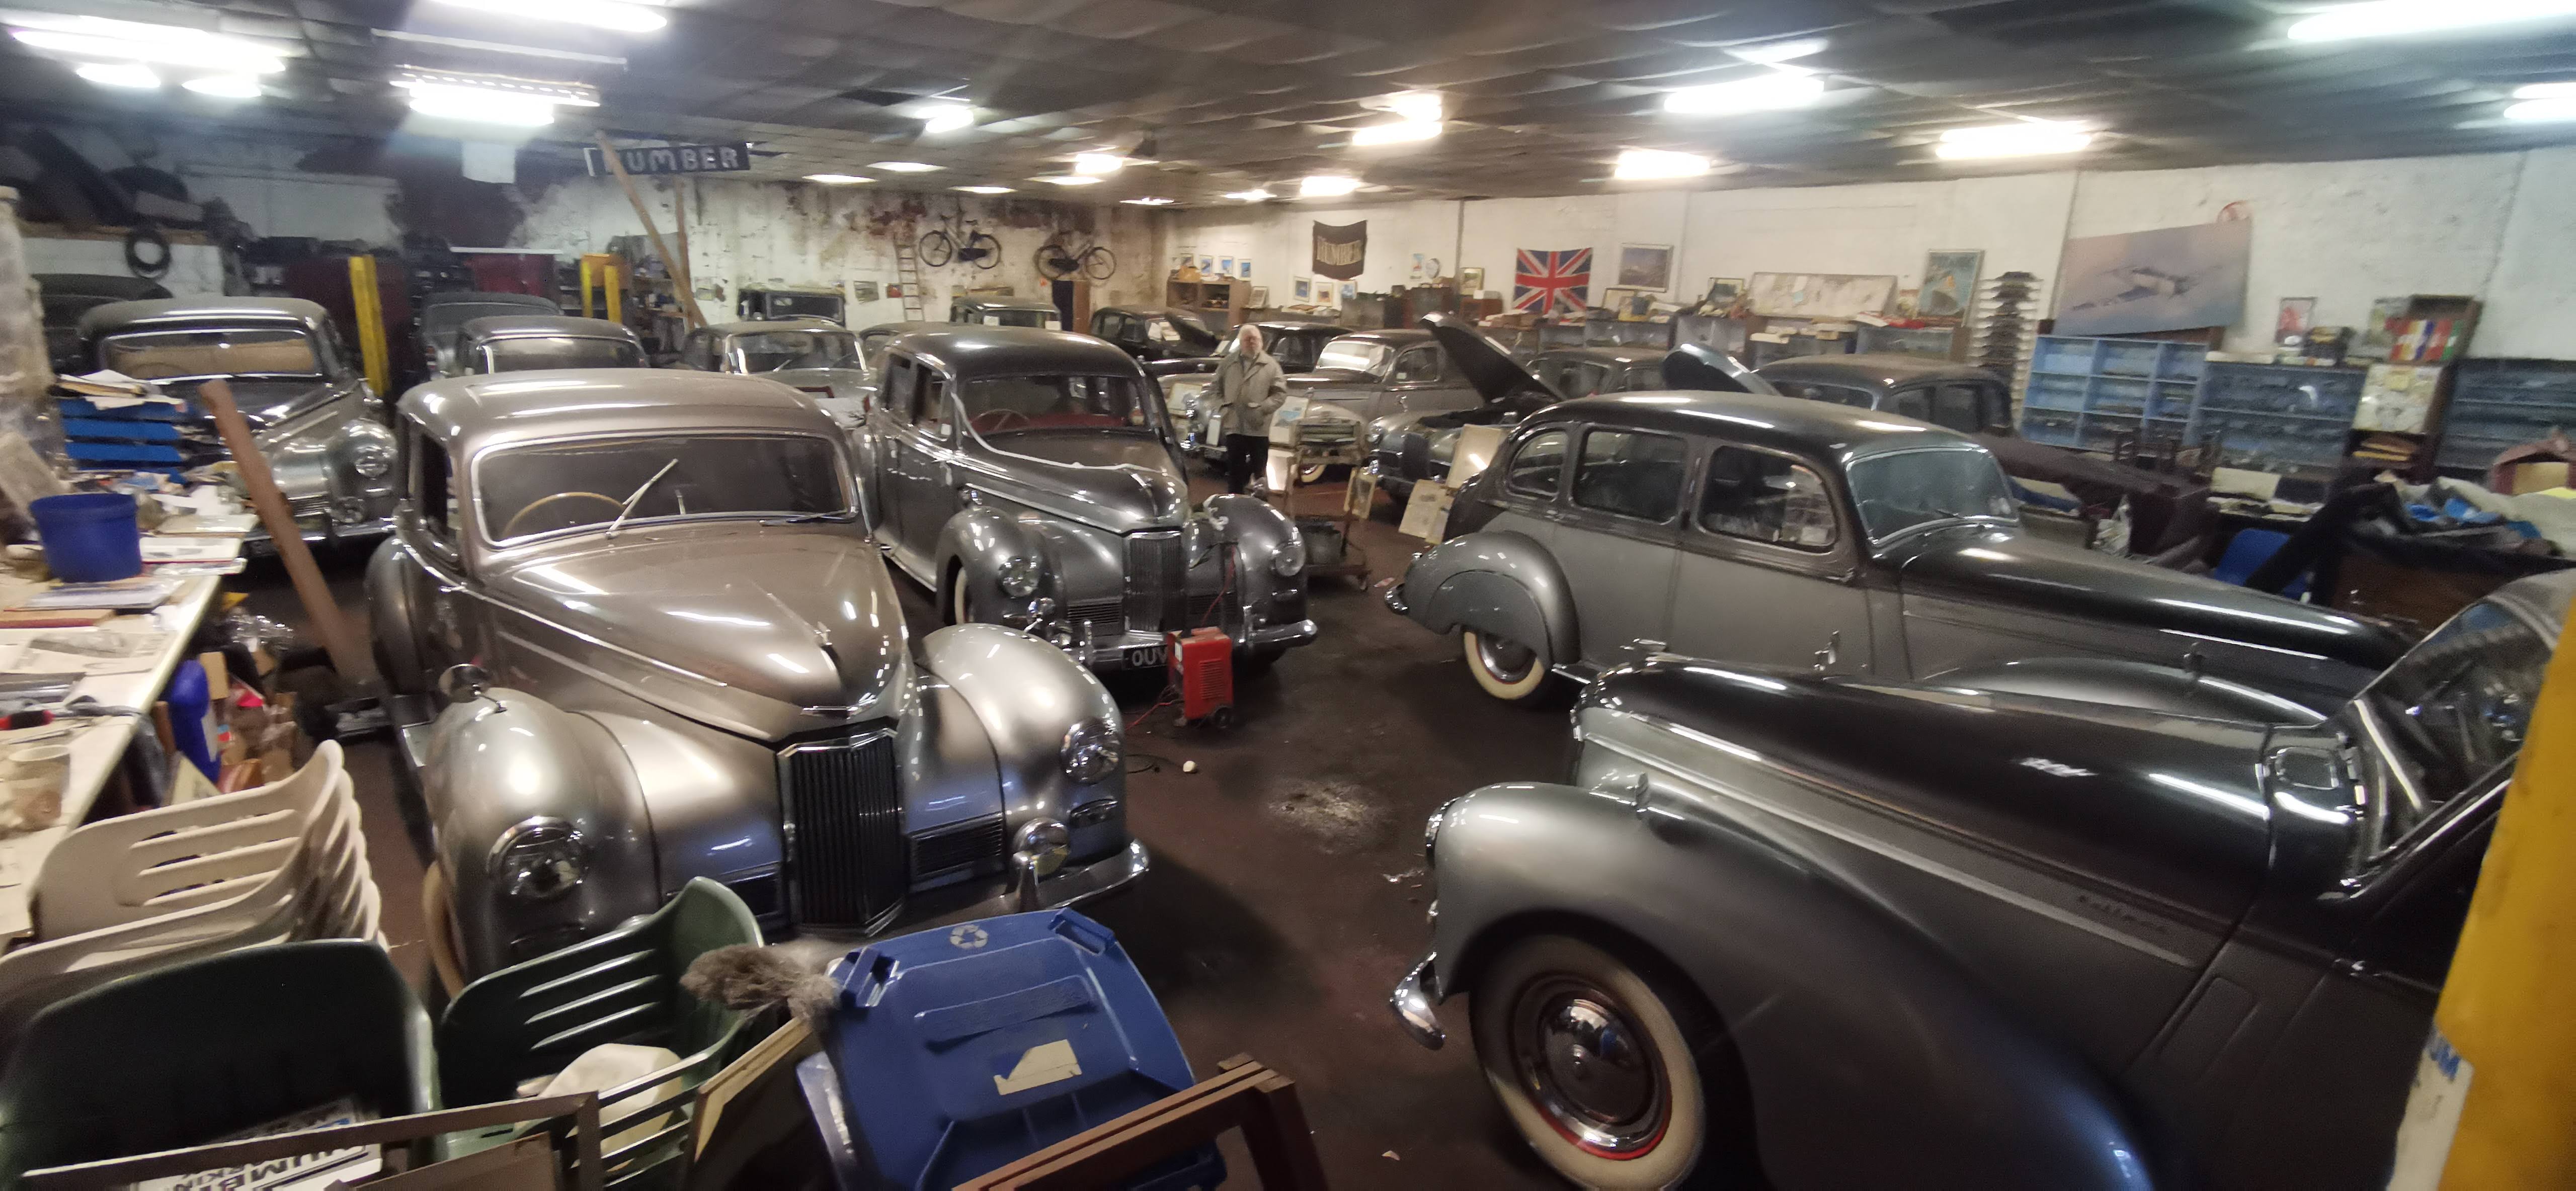 Some 16 vintage Humbers are set to head under the hammer